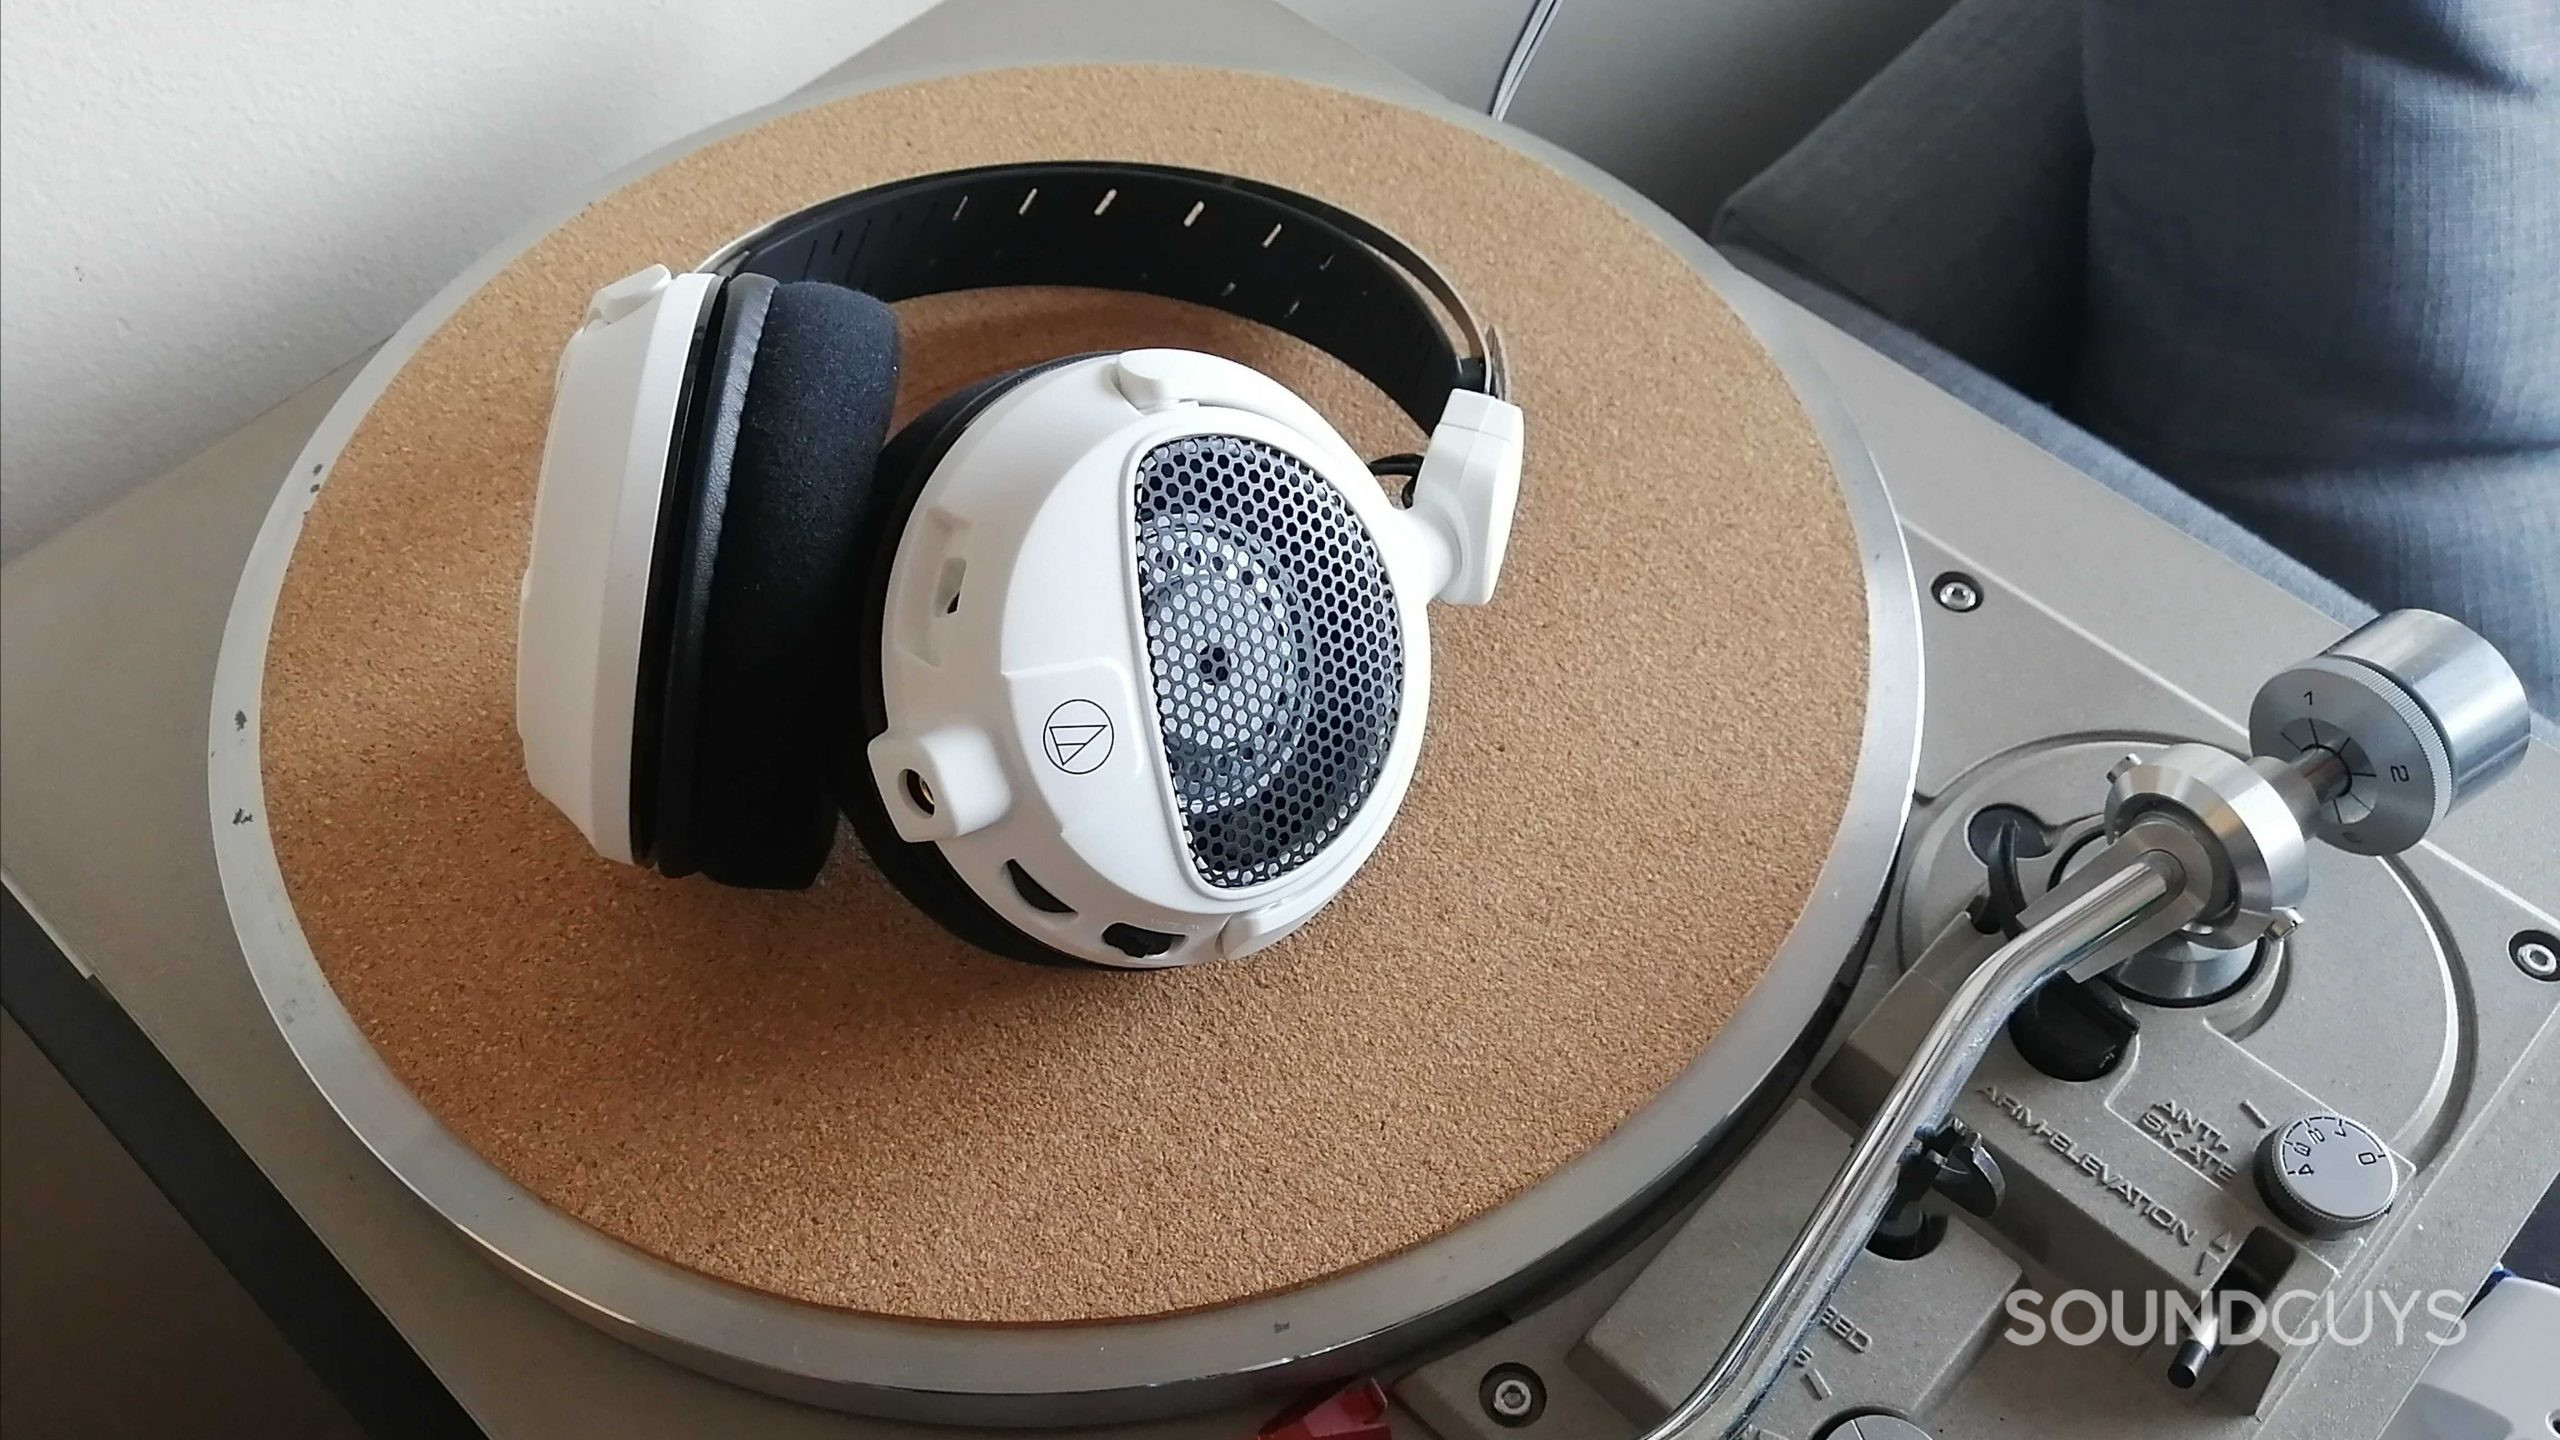 The Audio-Technica ATH-GDL3 sitting on top of a turntable platter.